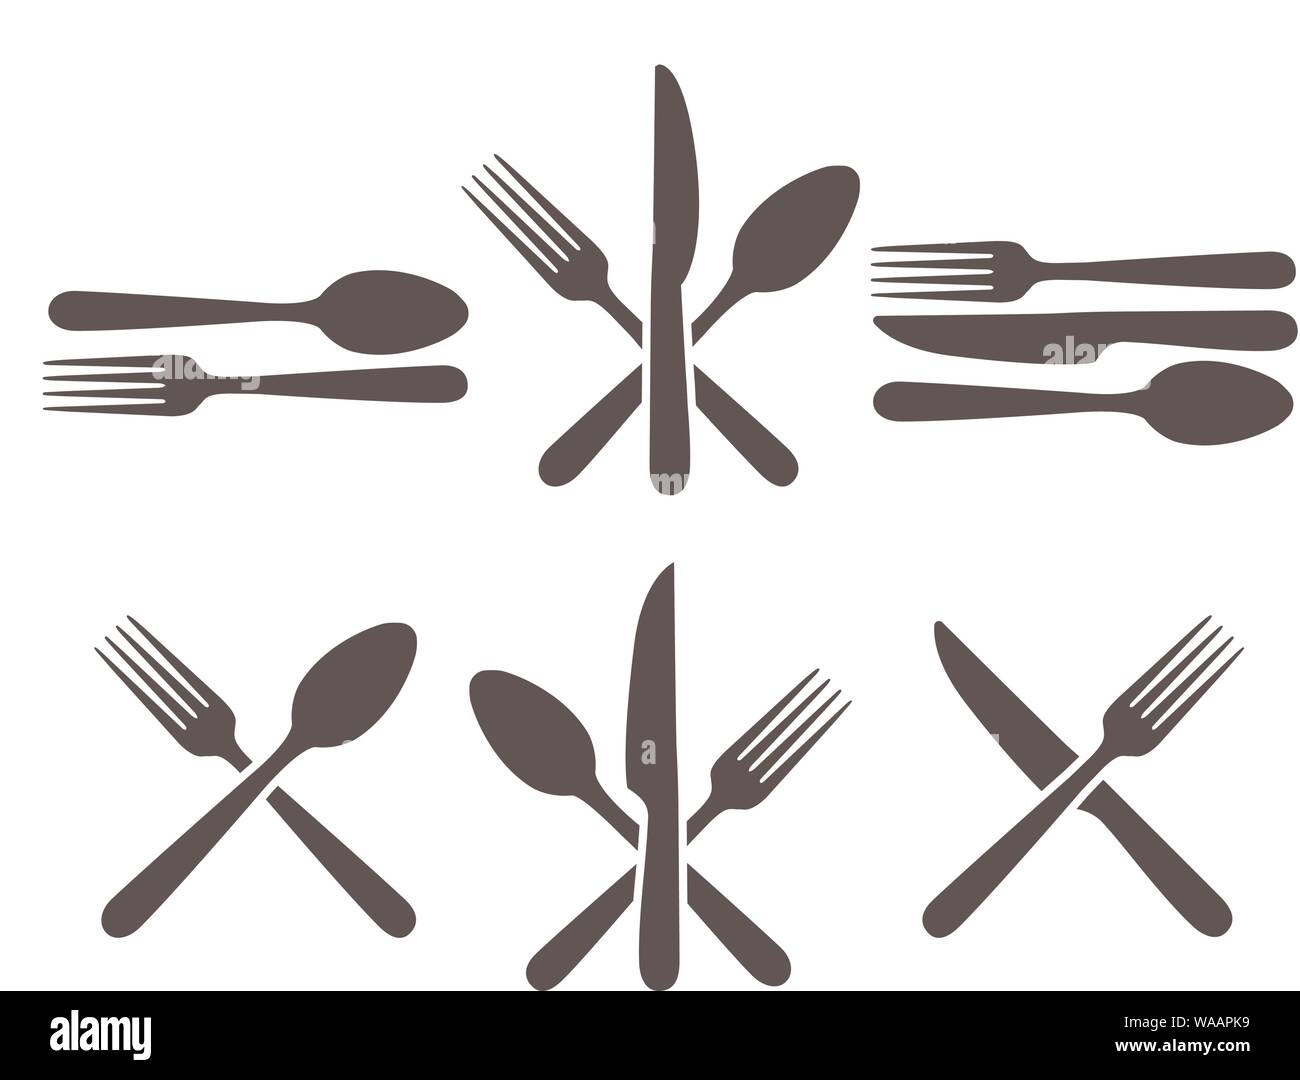 Cutlery icon set. Kitchen cutlery icons with fork, spoon and knife image, metal dining facilities for restaurant Stock Vector